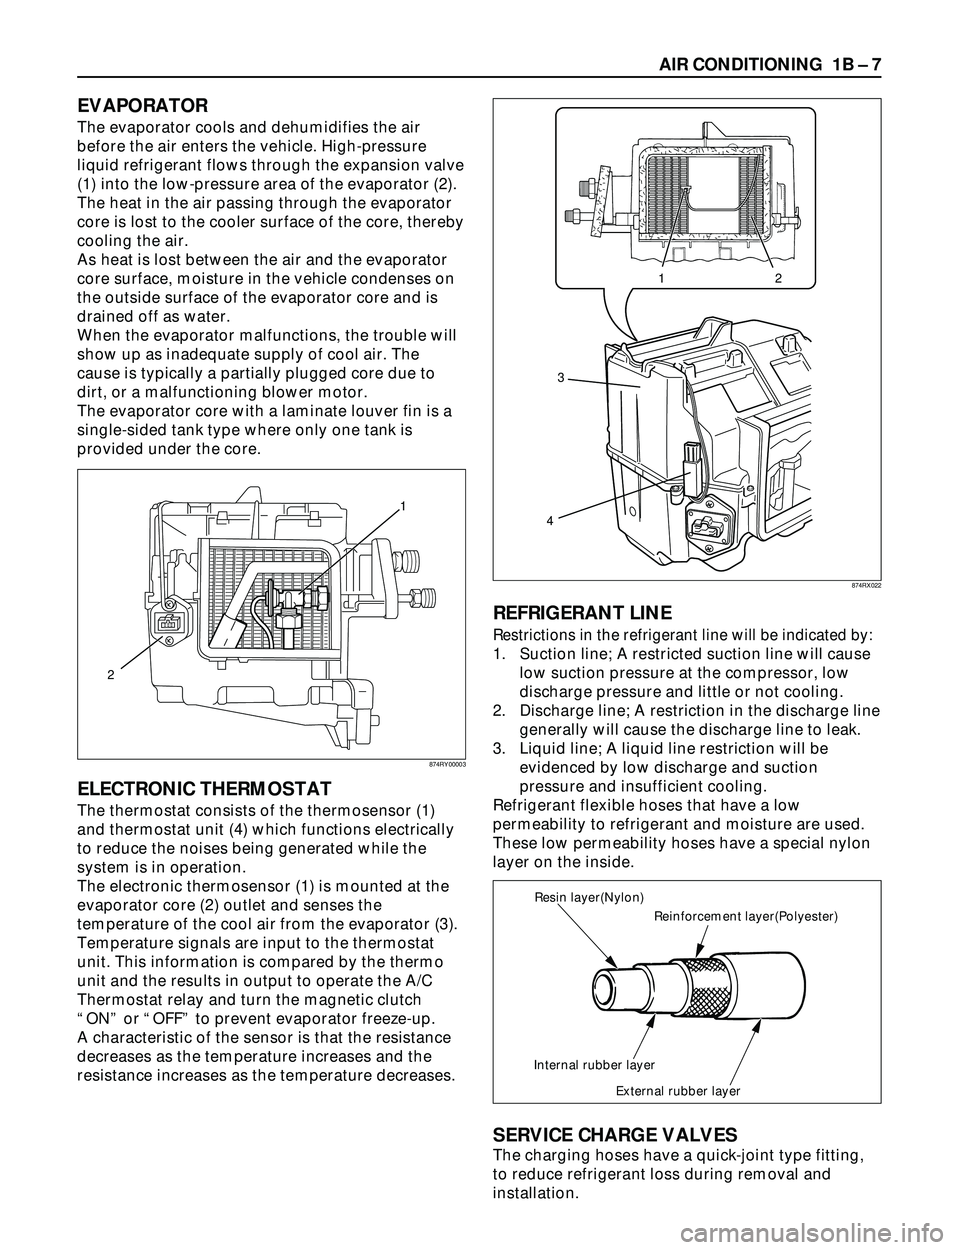 ISUZU TROOPER 1998  Service Repair Manual AIR CONDITIONING  1B Ð 7
EVAPORATOR
The evaporator cools and dehumidifies the air
before the air enters the vehicle. High-pressure
liquid refrigerant flows through the expansion valve
(1) into the lo